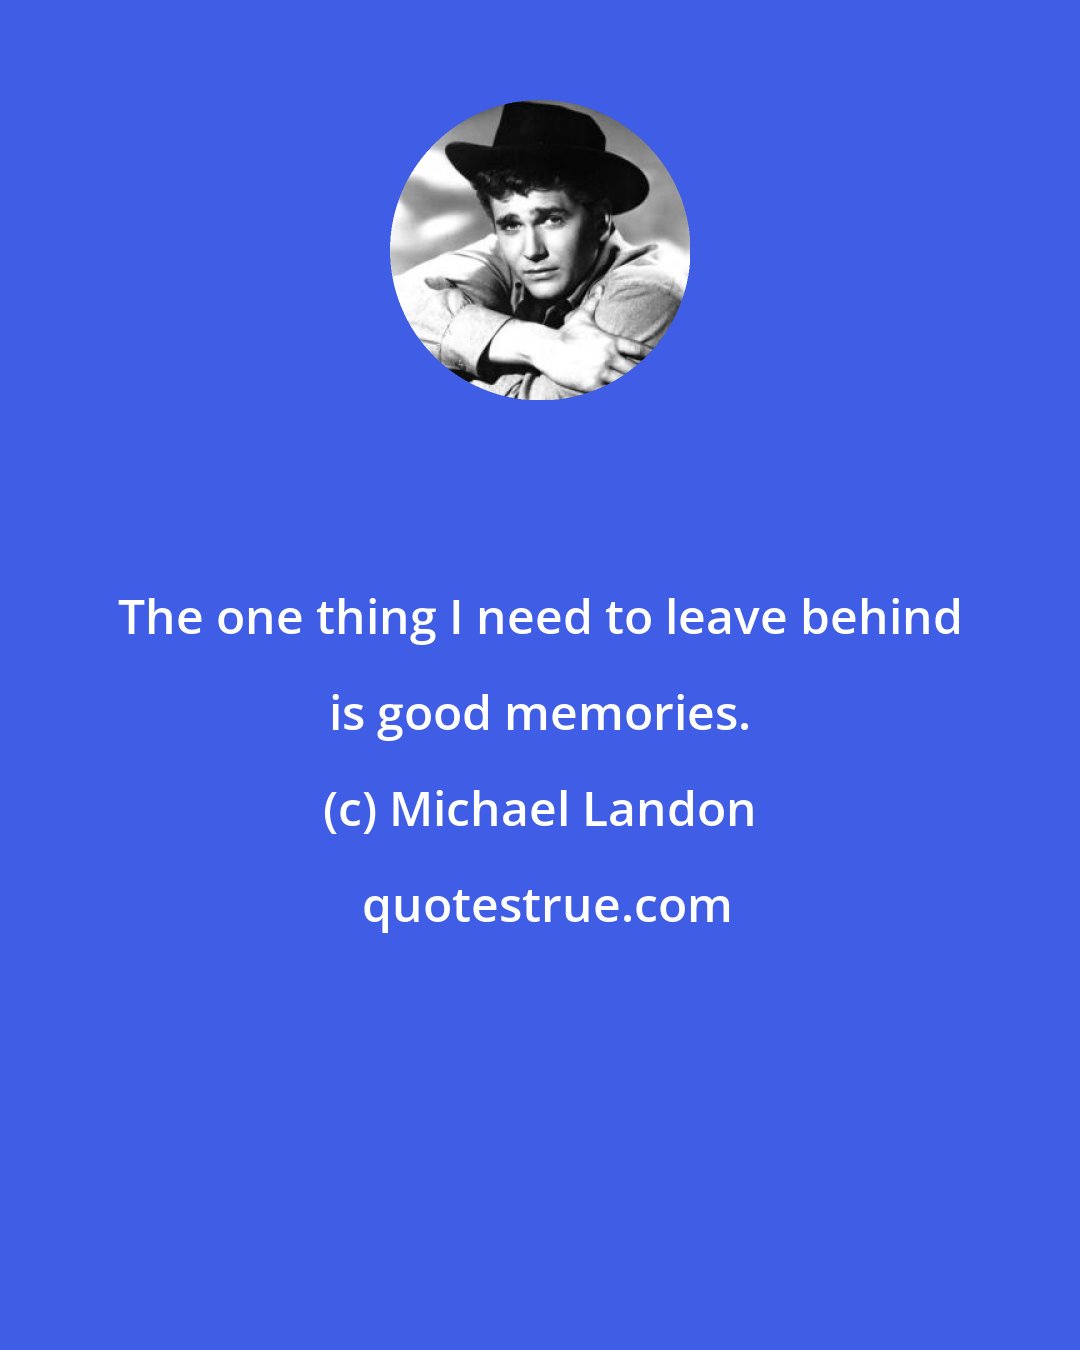 Michael Landon: The one thing I need to leave behind is good memories.